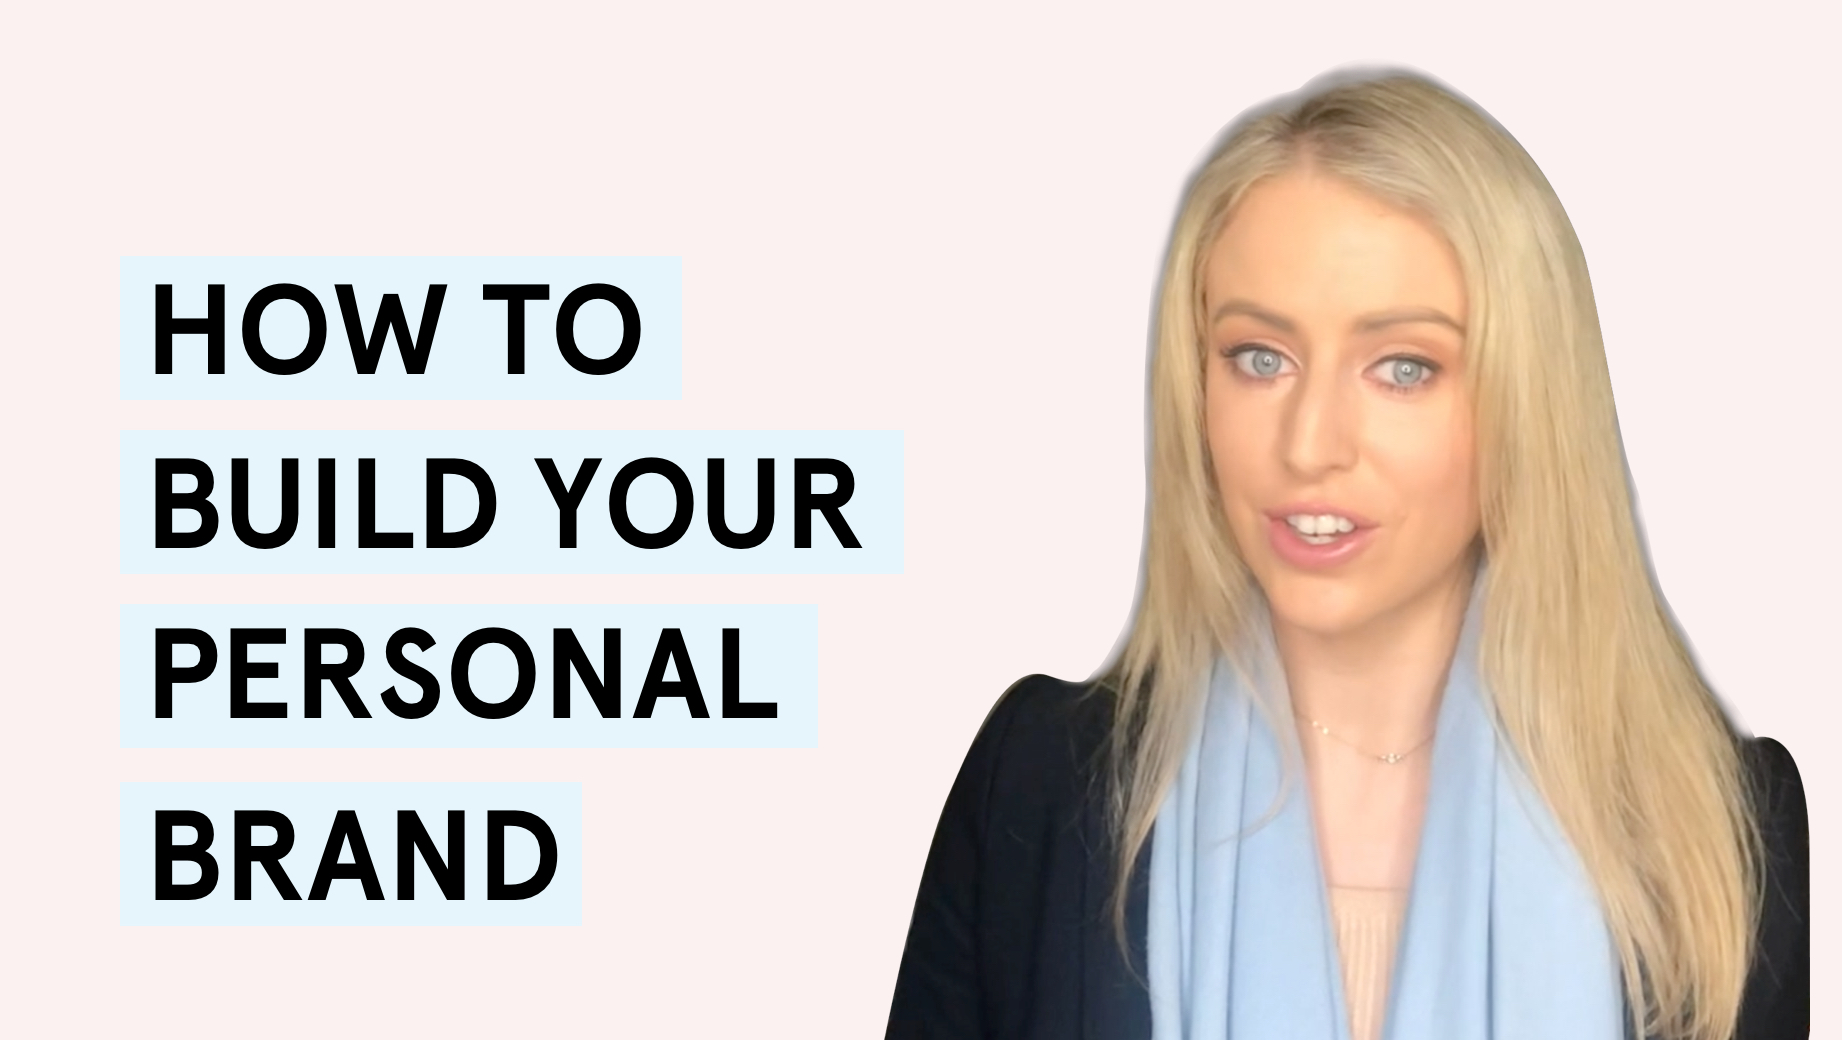 5 steps to build your personal brand